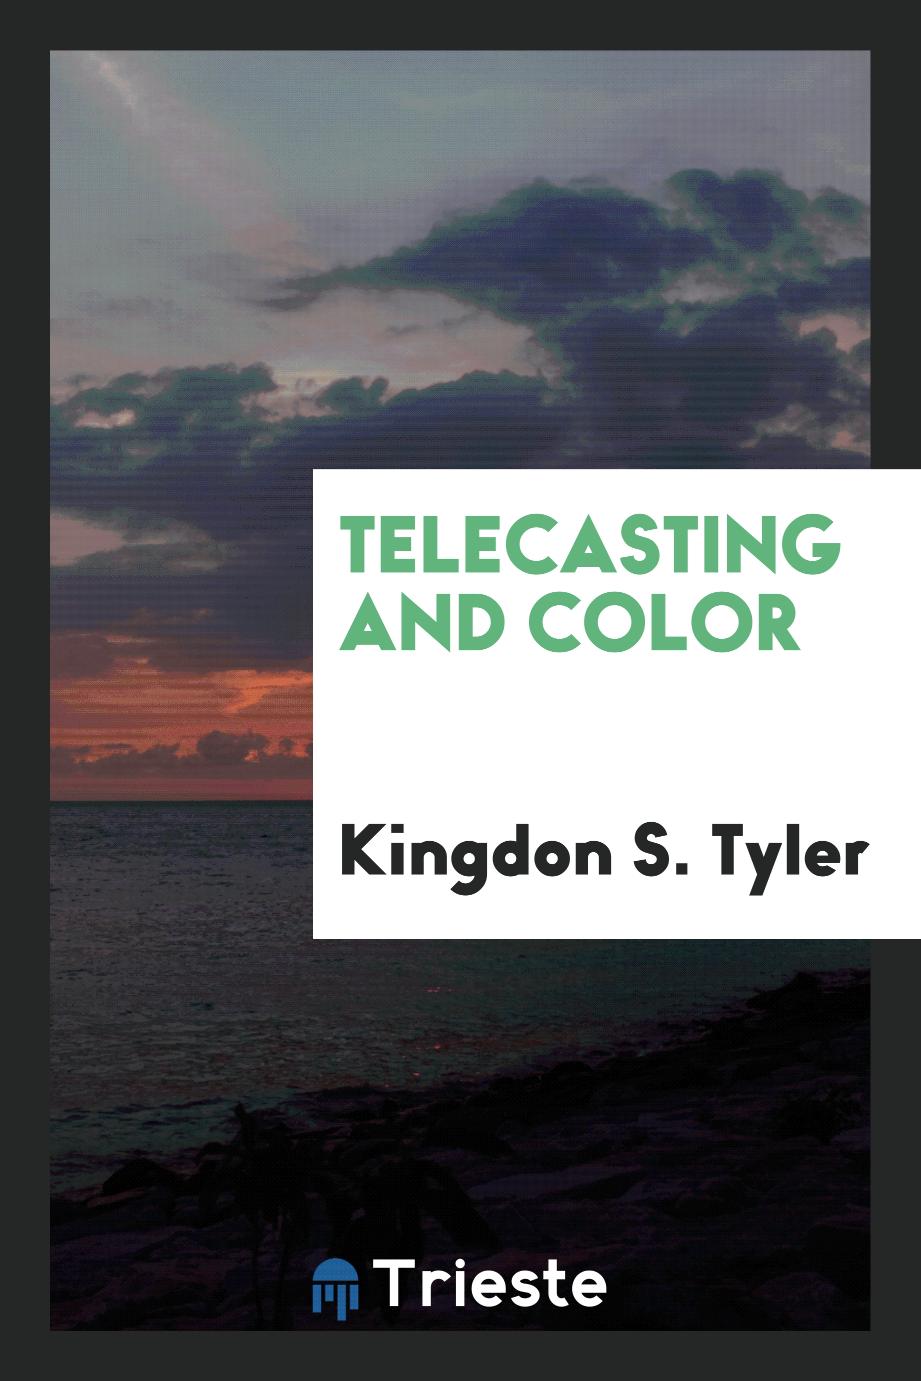 Telecasting and color